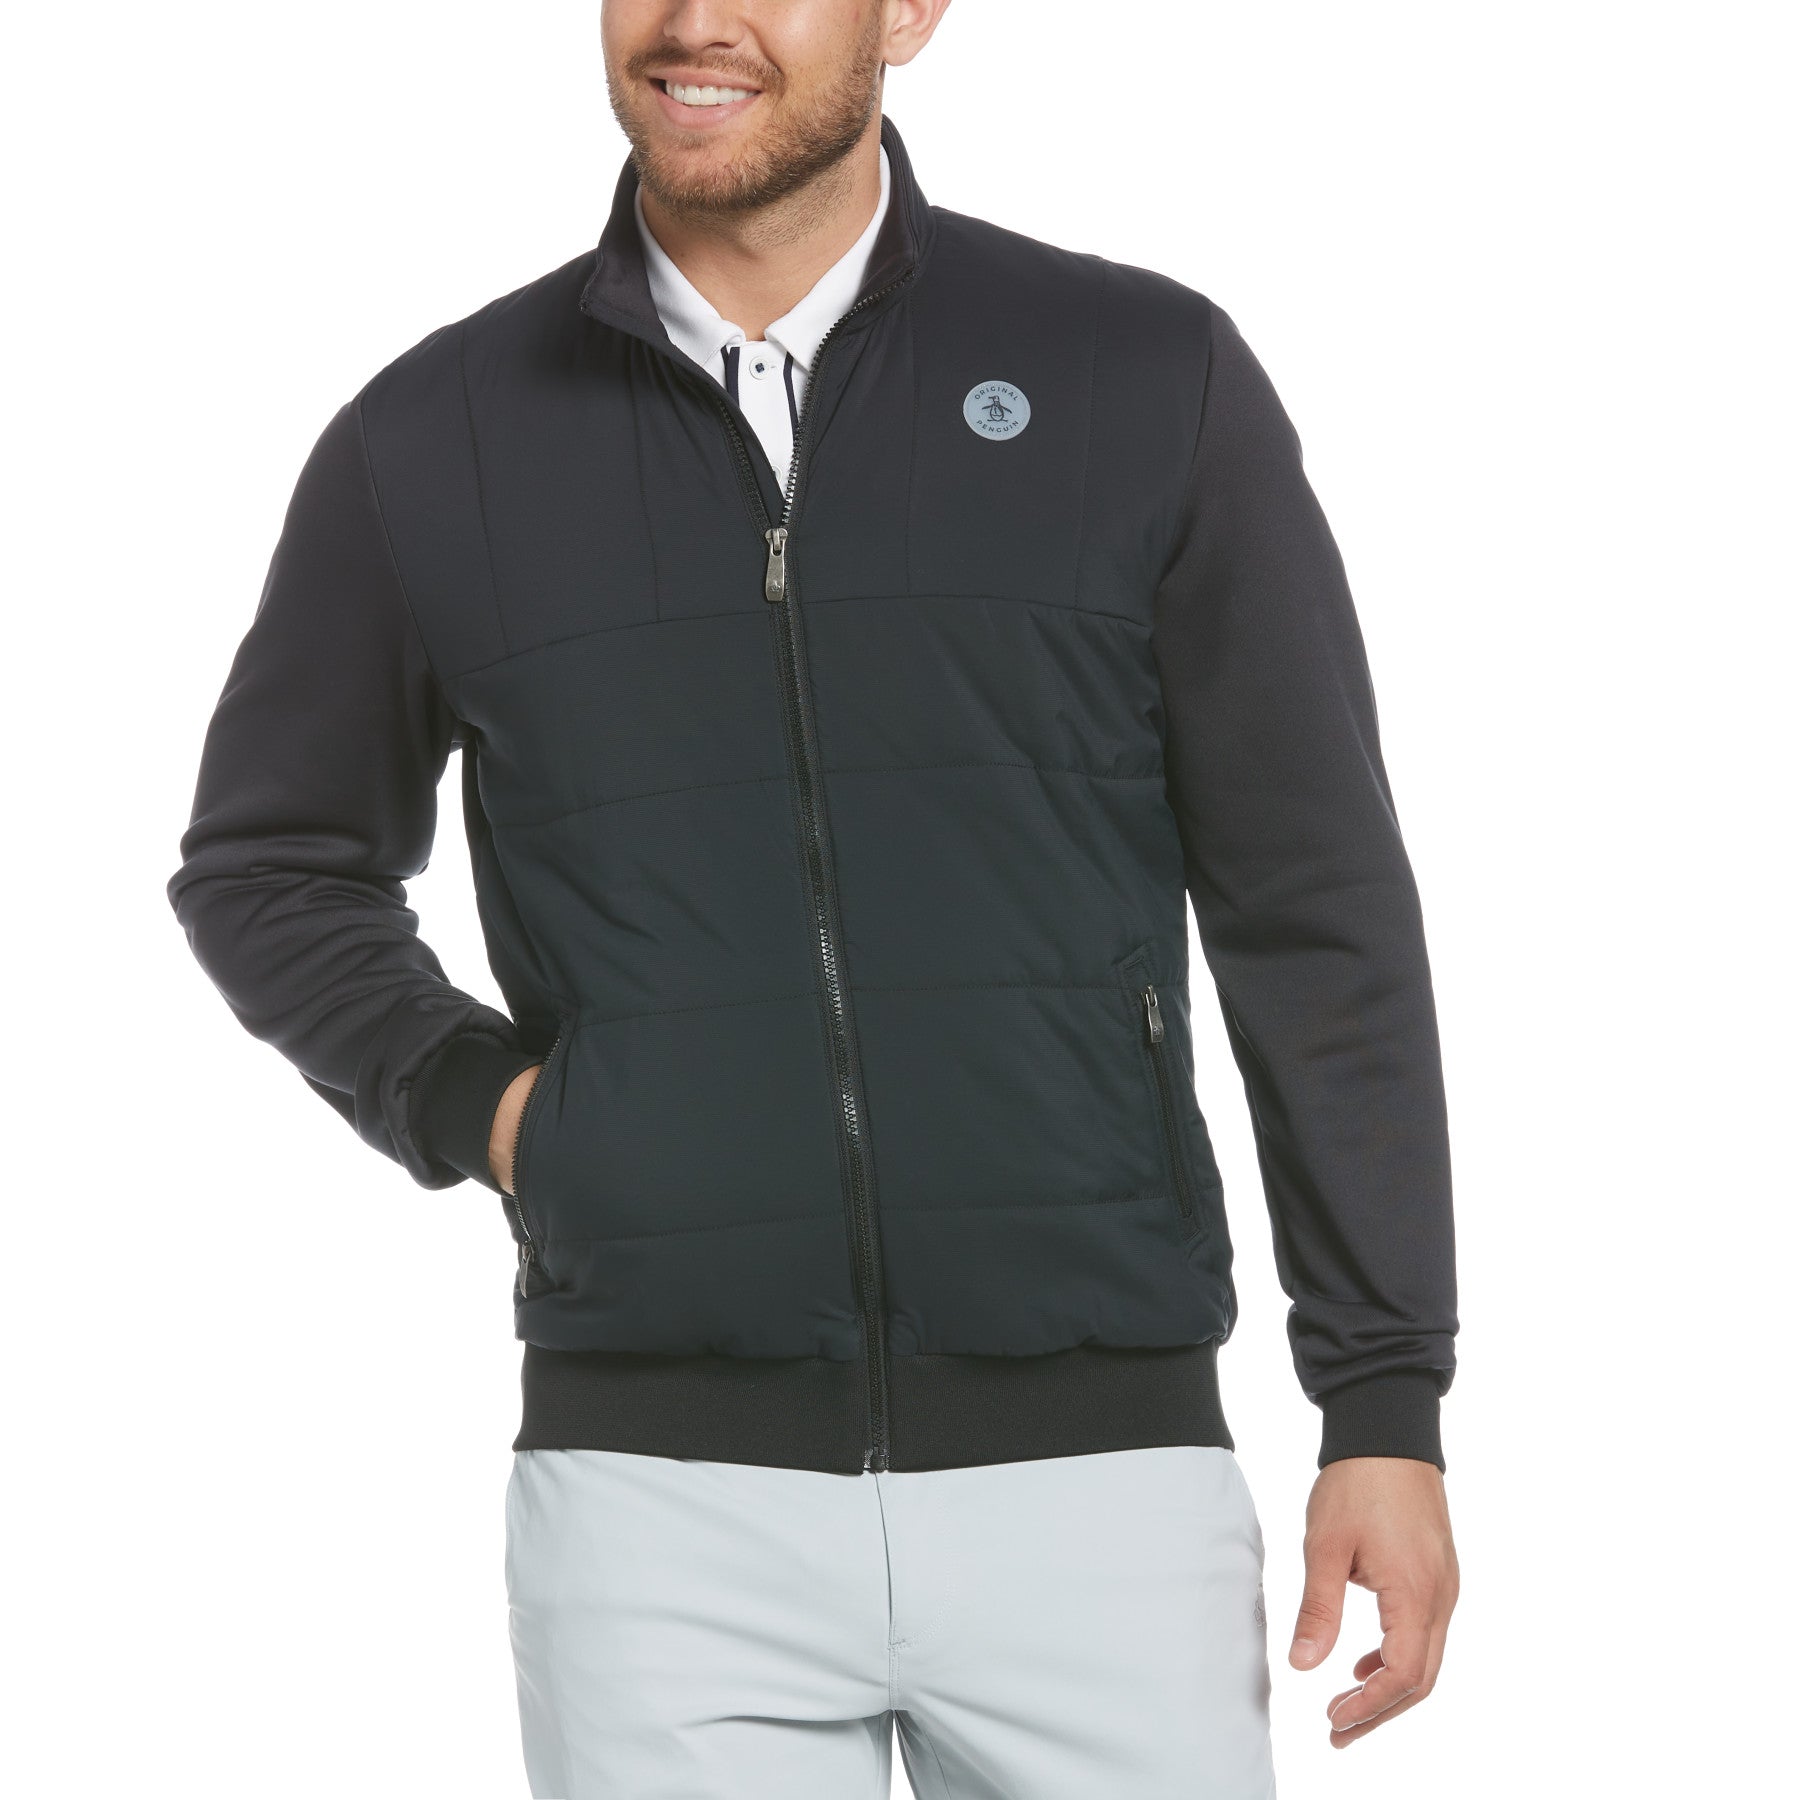 View Insulated Mixed Media Golf Jacket In Caviar information